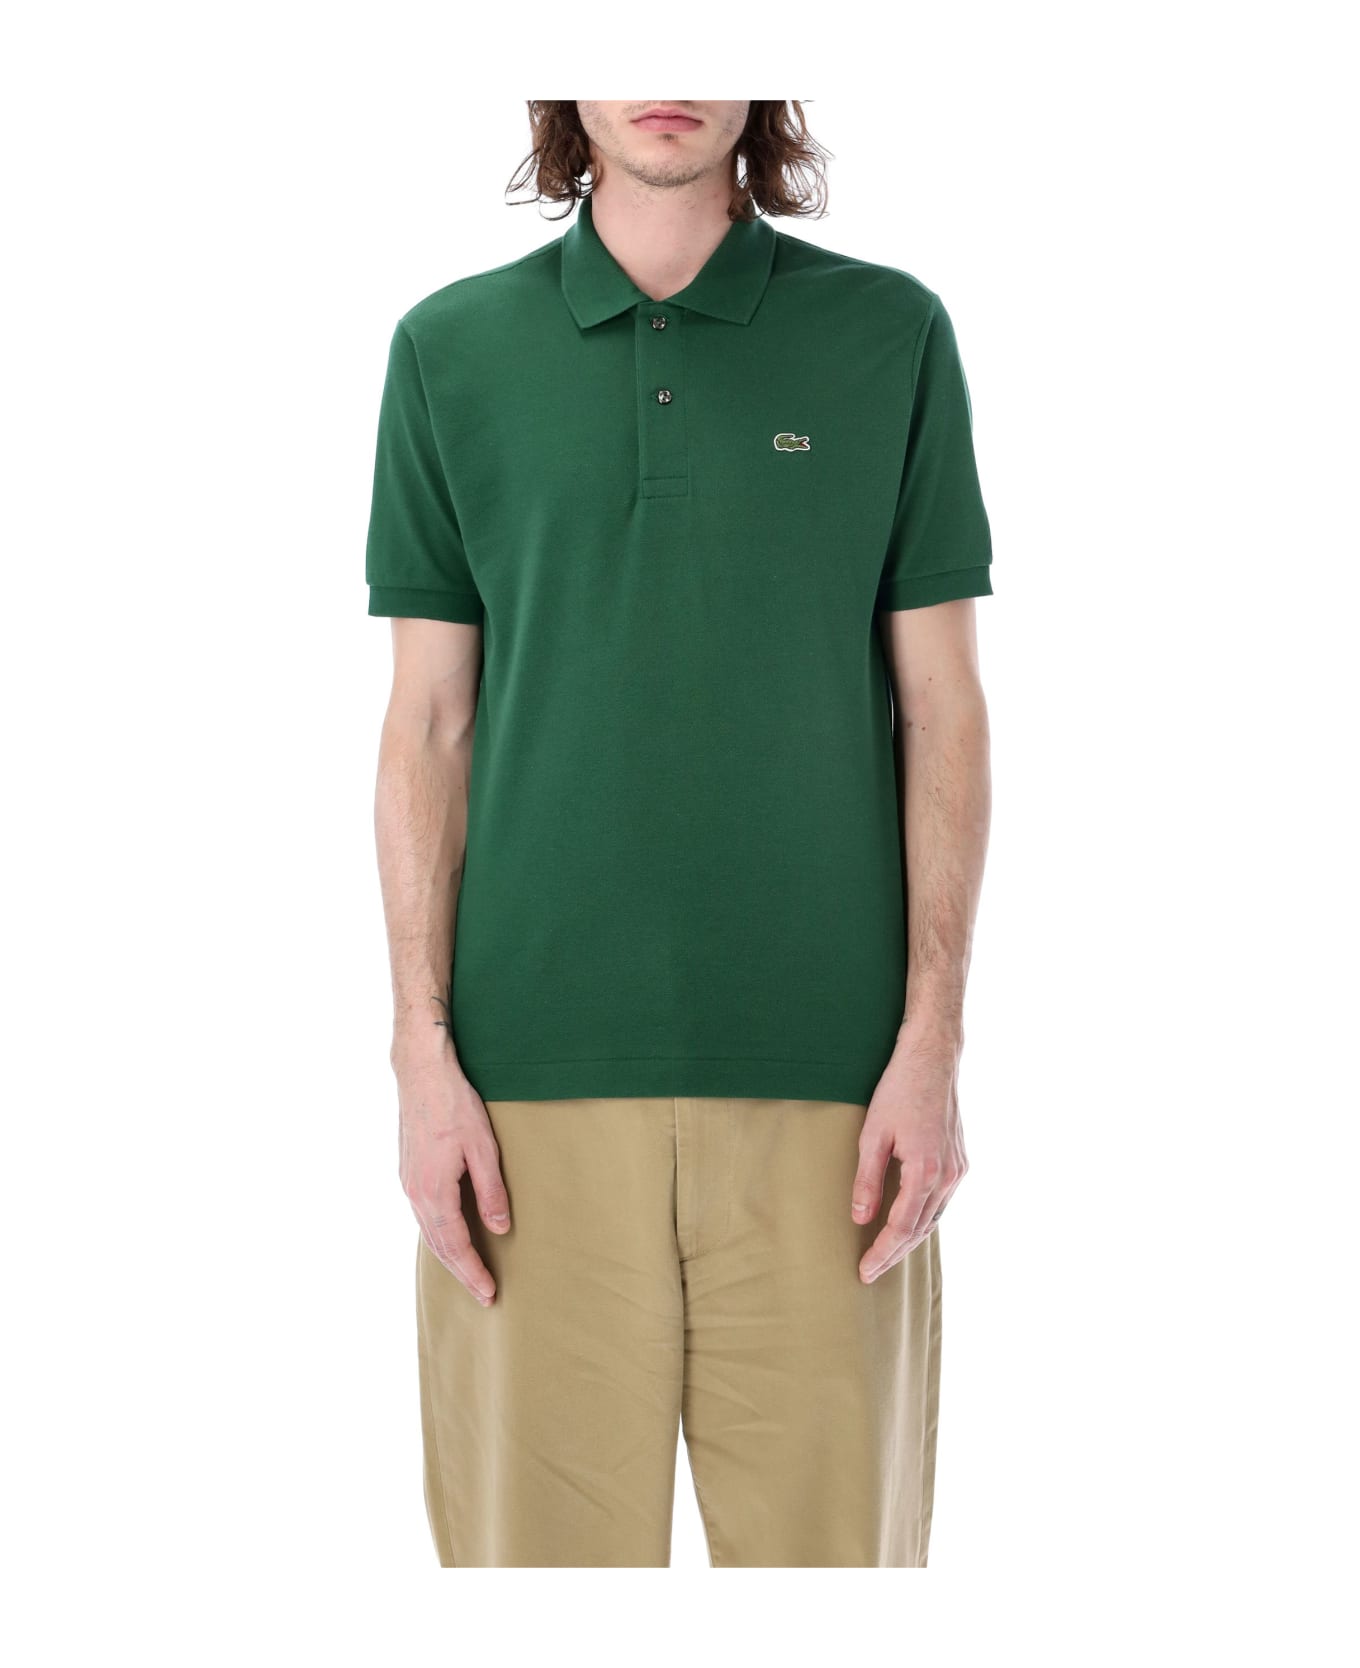 Lacoste Classic Fit Polo Shirt - GREEN ポロシャツ